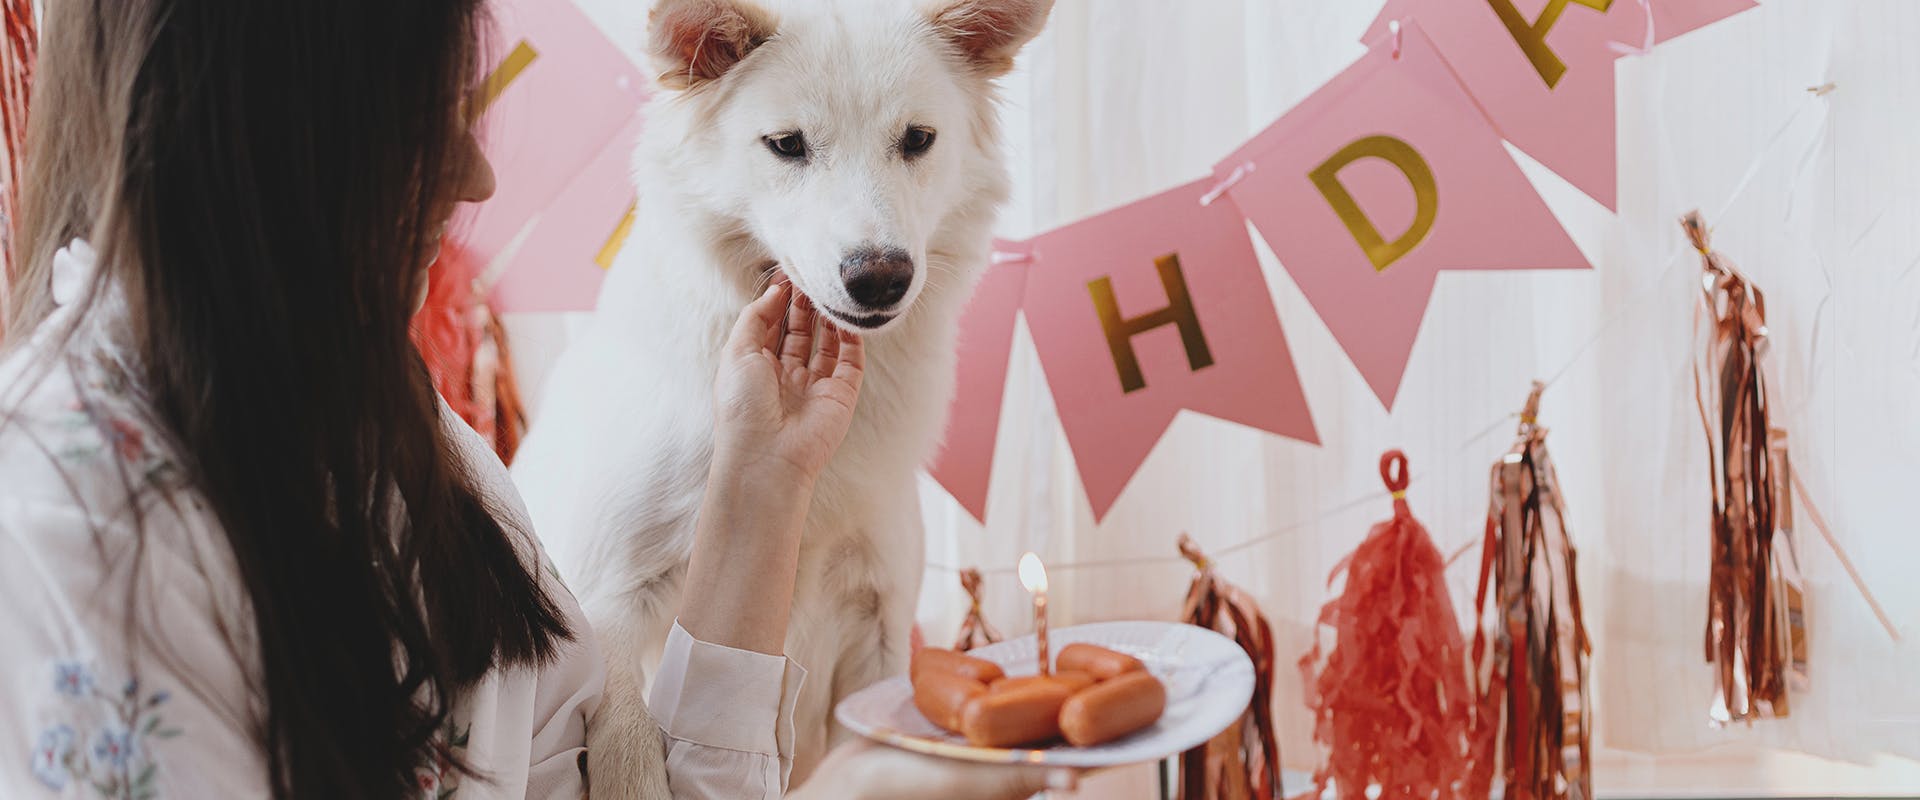 A woman presenting a plate of treats to a white dog, 'birthday' bunting in the background